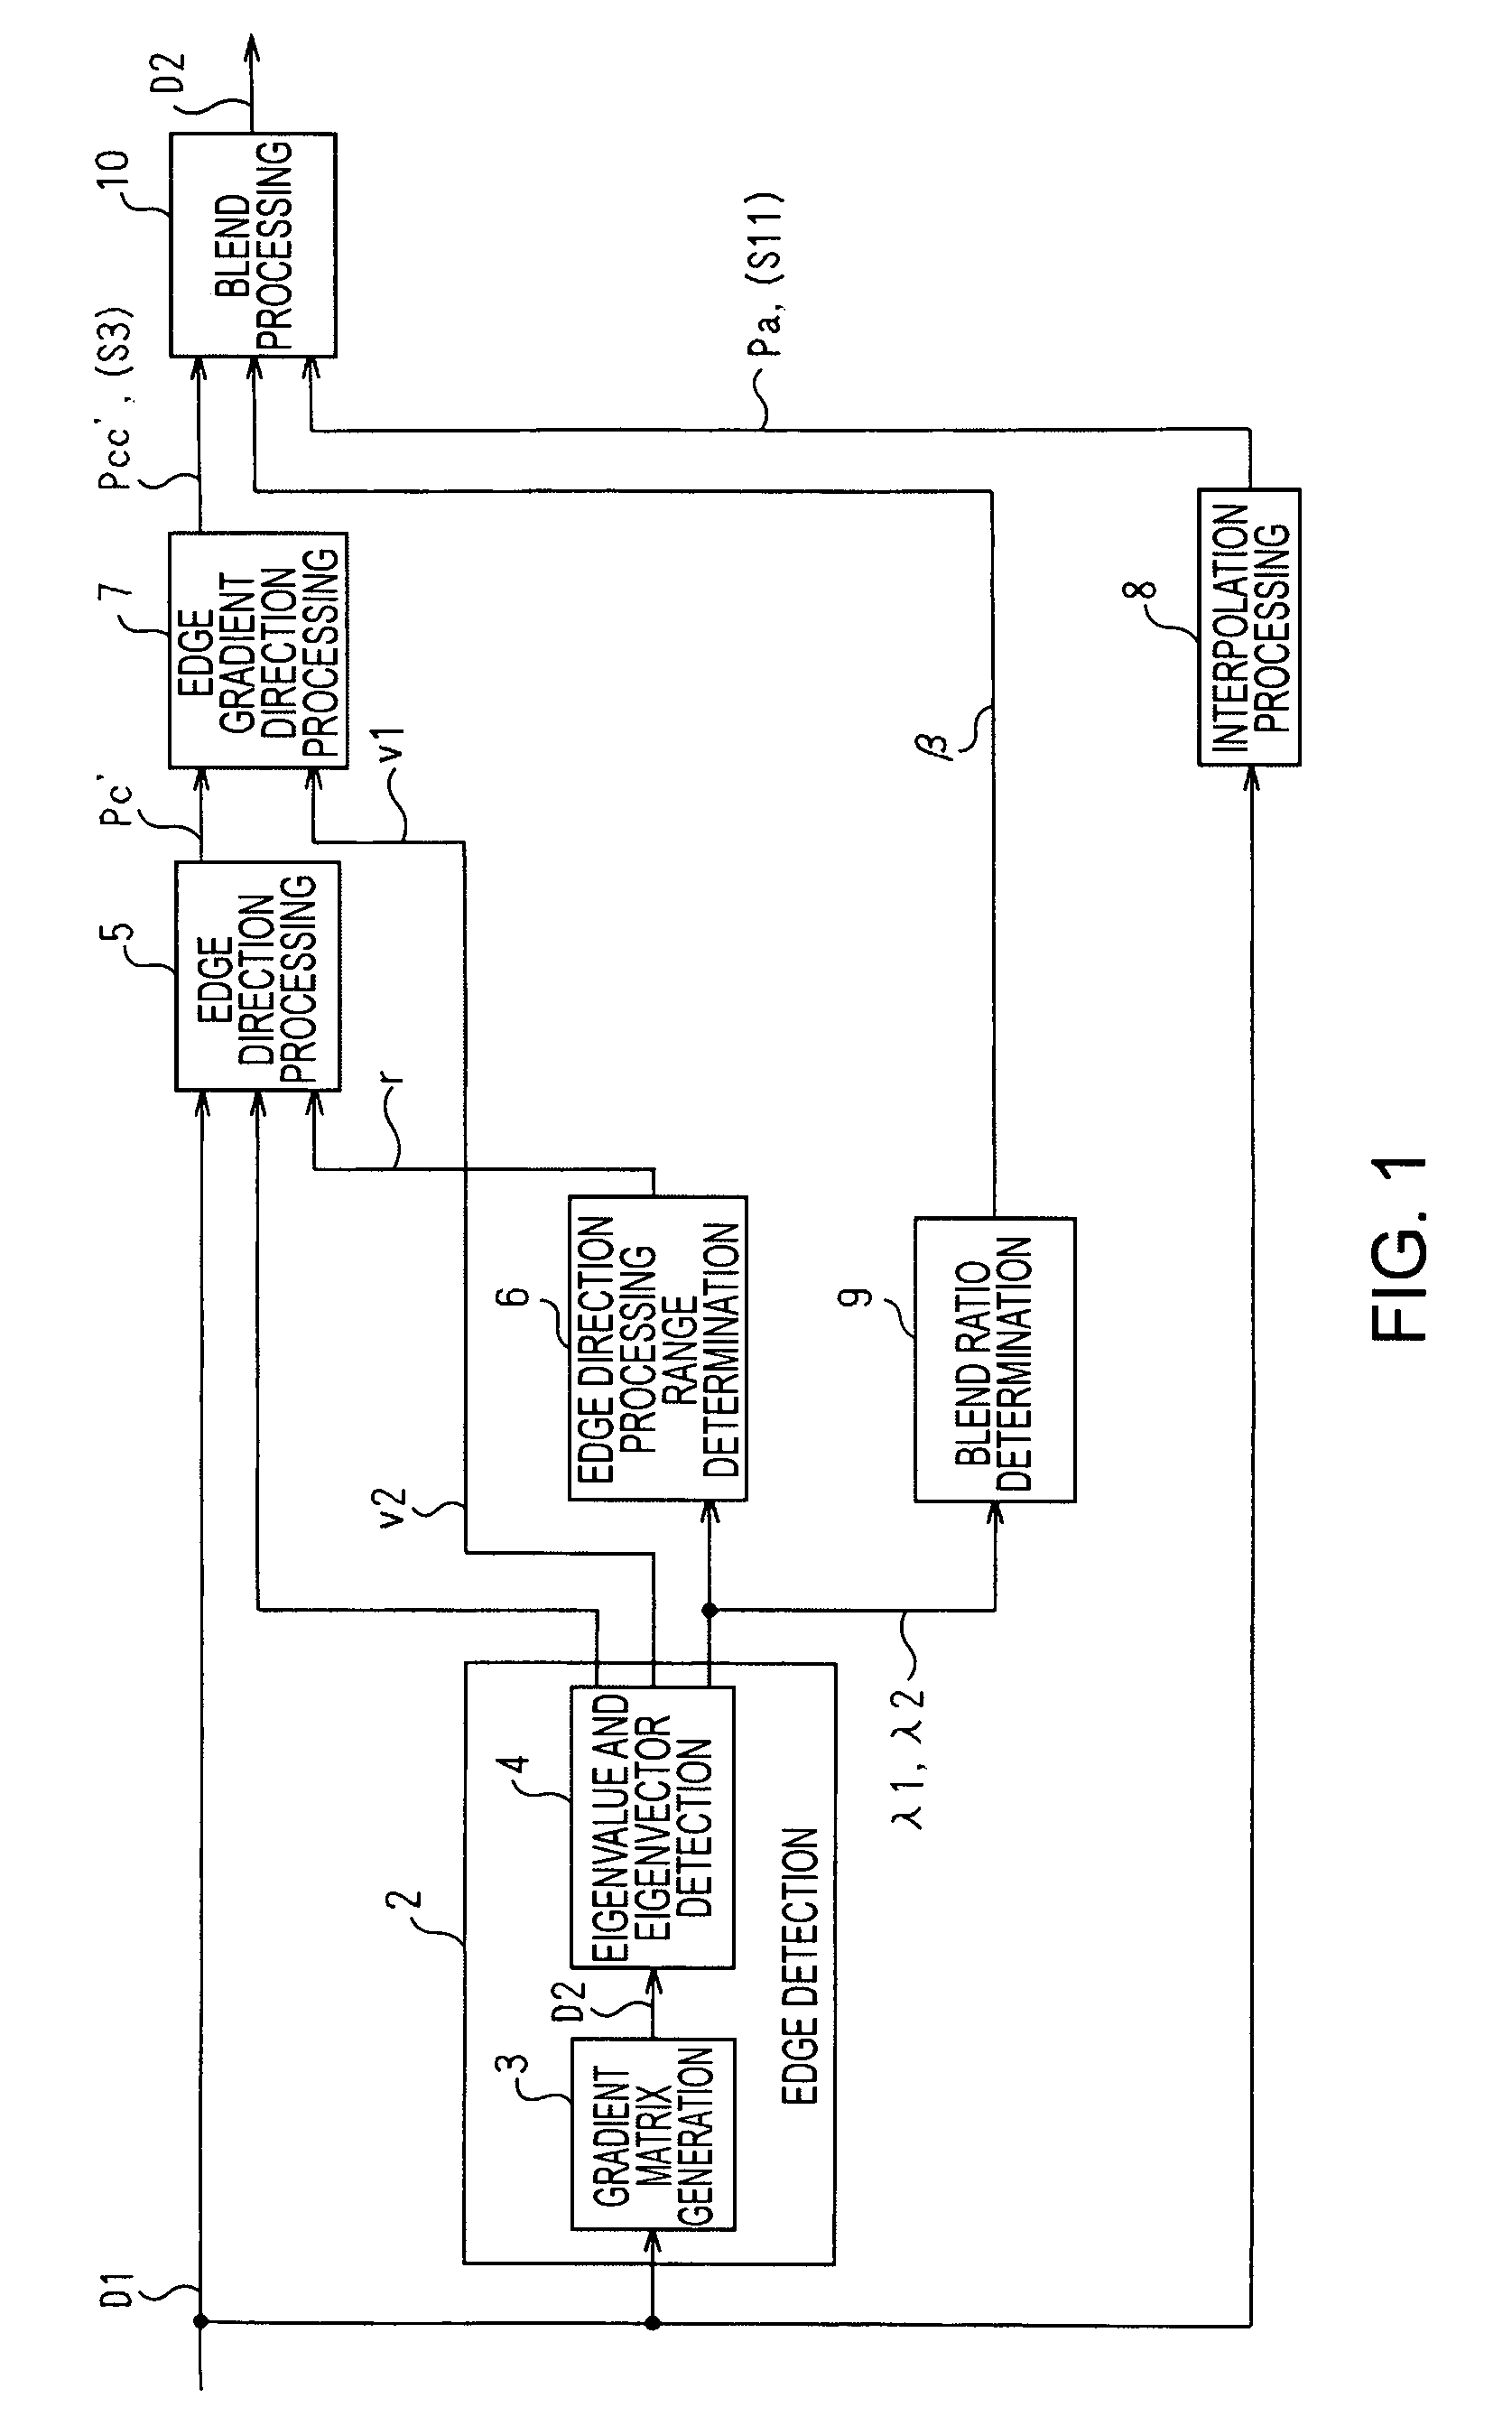 Image processing apparatus, image processing method, program of image processing method, and recording medium in which program of image processing method has been recorded